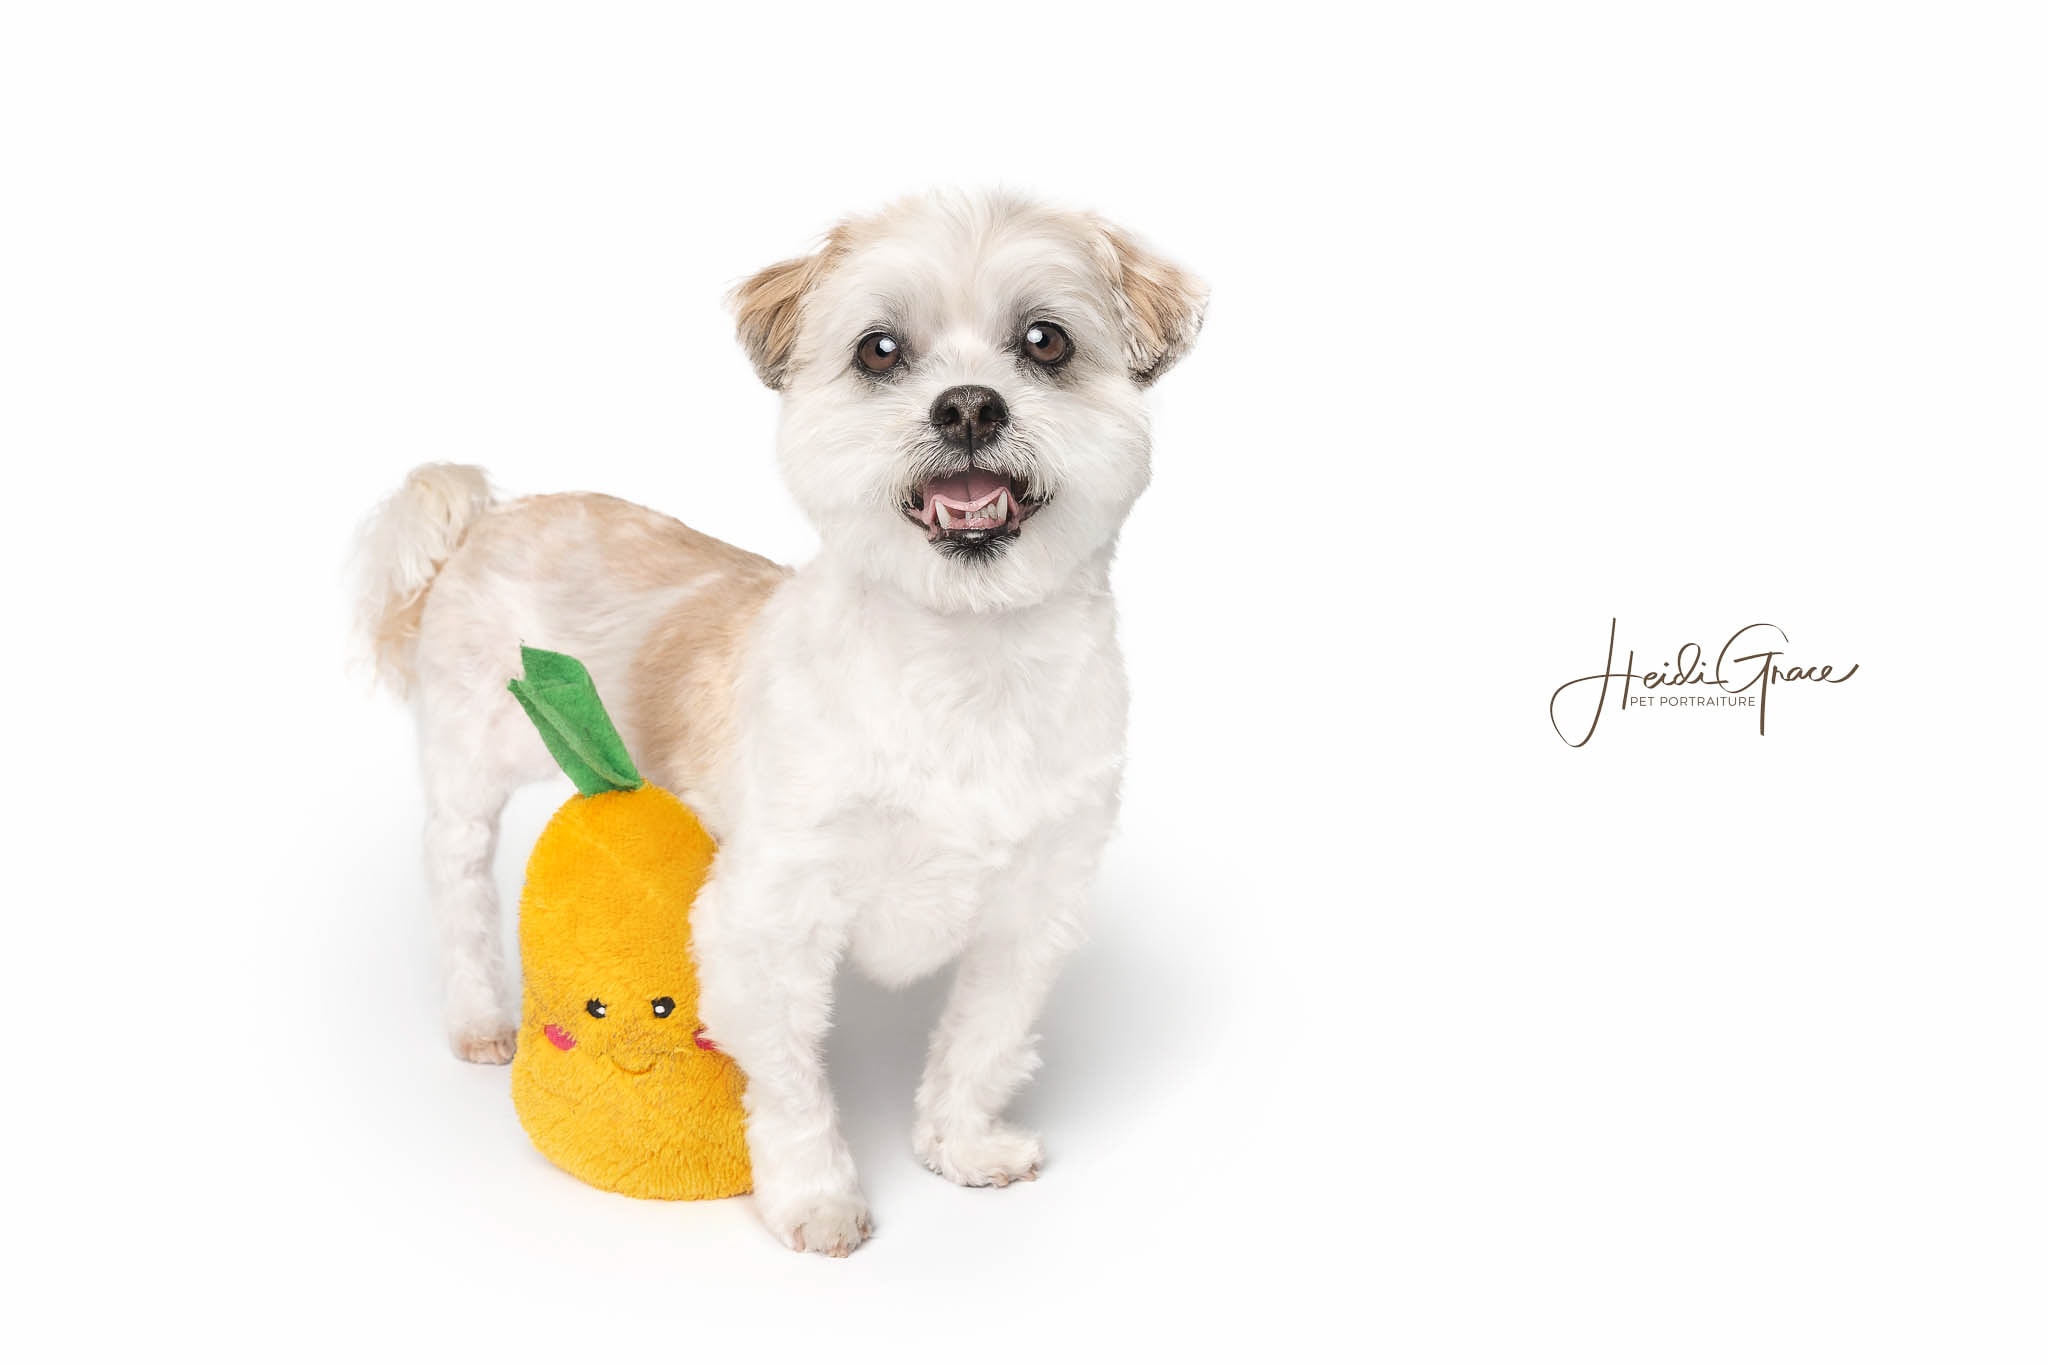 photo of a white dog on a white background standing beside his favourite toy and smiling.